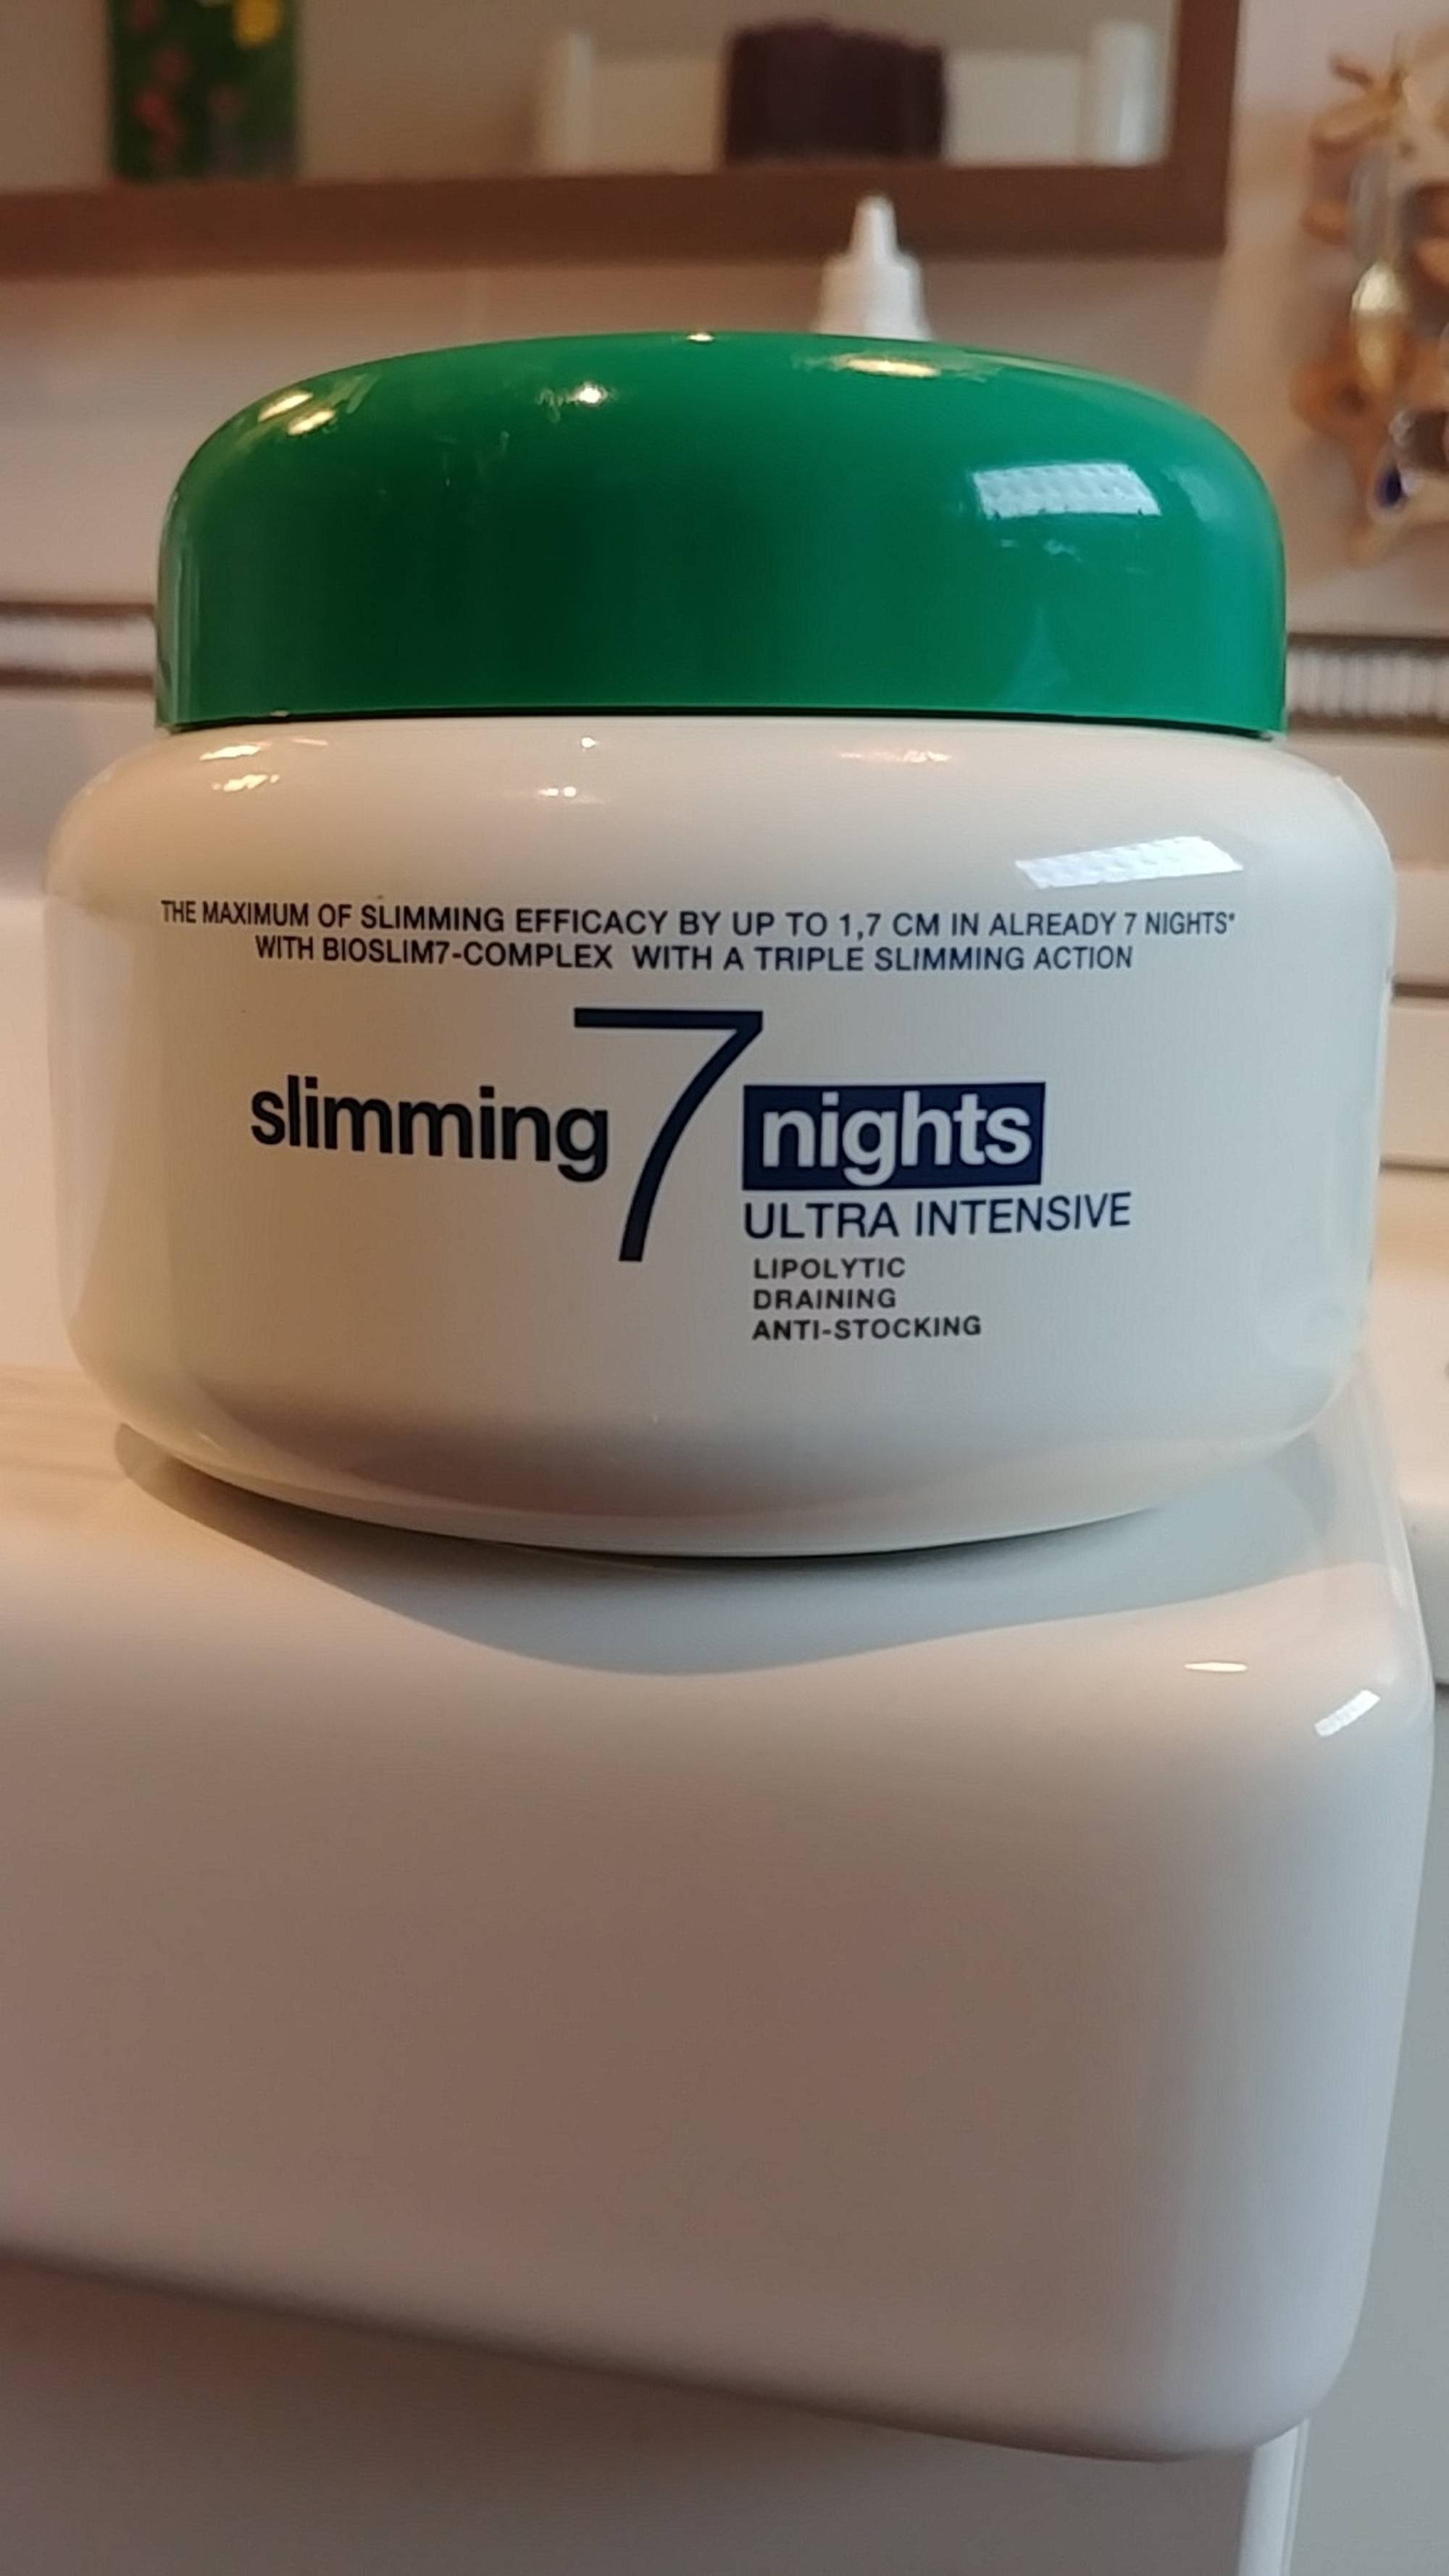 SOMATOLINE COSMETIC - Crème amincissant 7 nuits ultra intensif